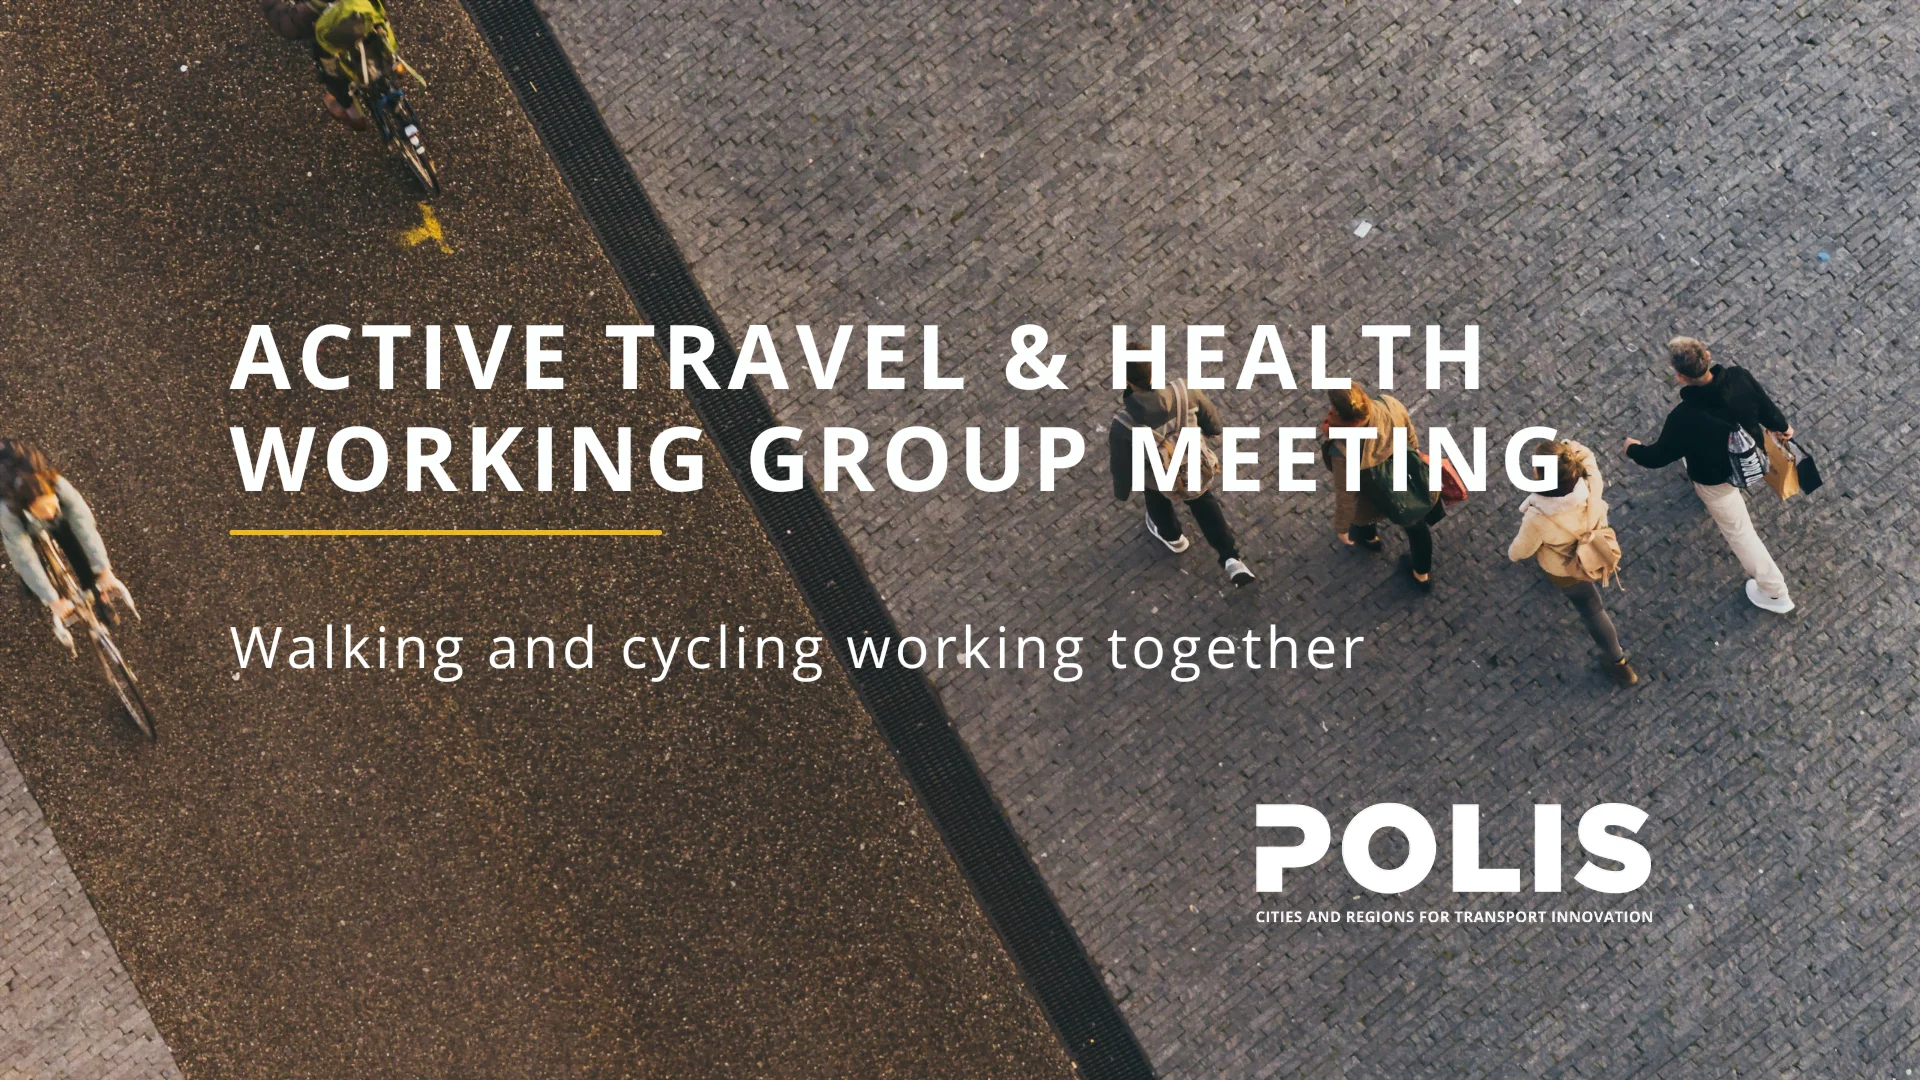 Active Travel & Health Working Group: Cycling and walking conquering territory together